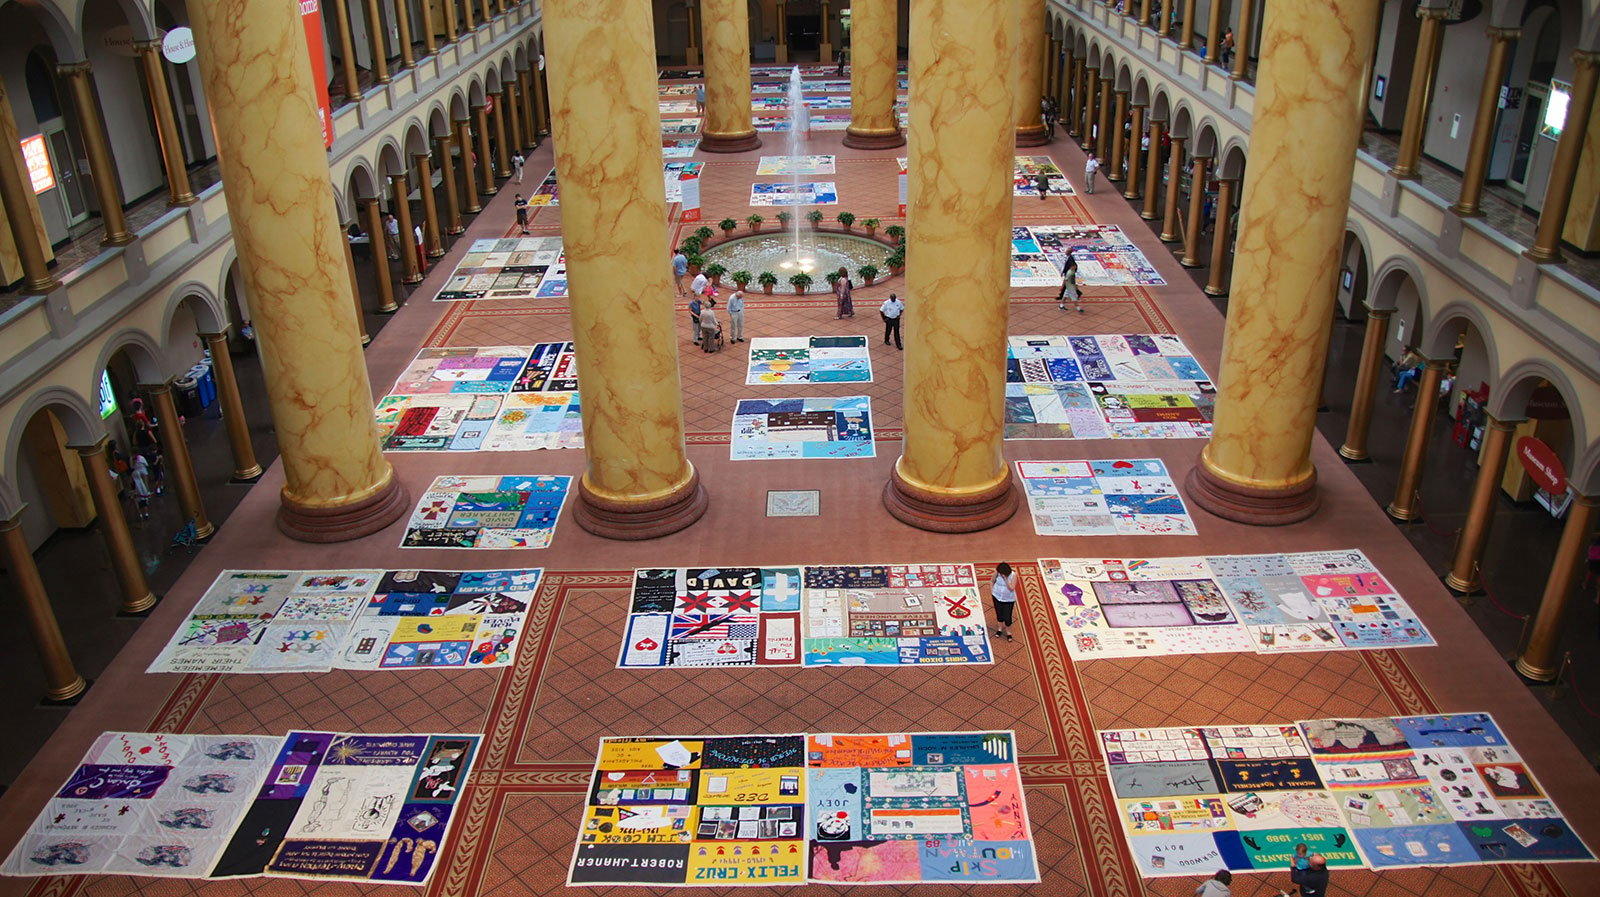 The AIDS Memorial Quilt on display at the National Building Museum in Washington, D.C. in 2012